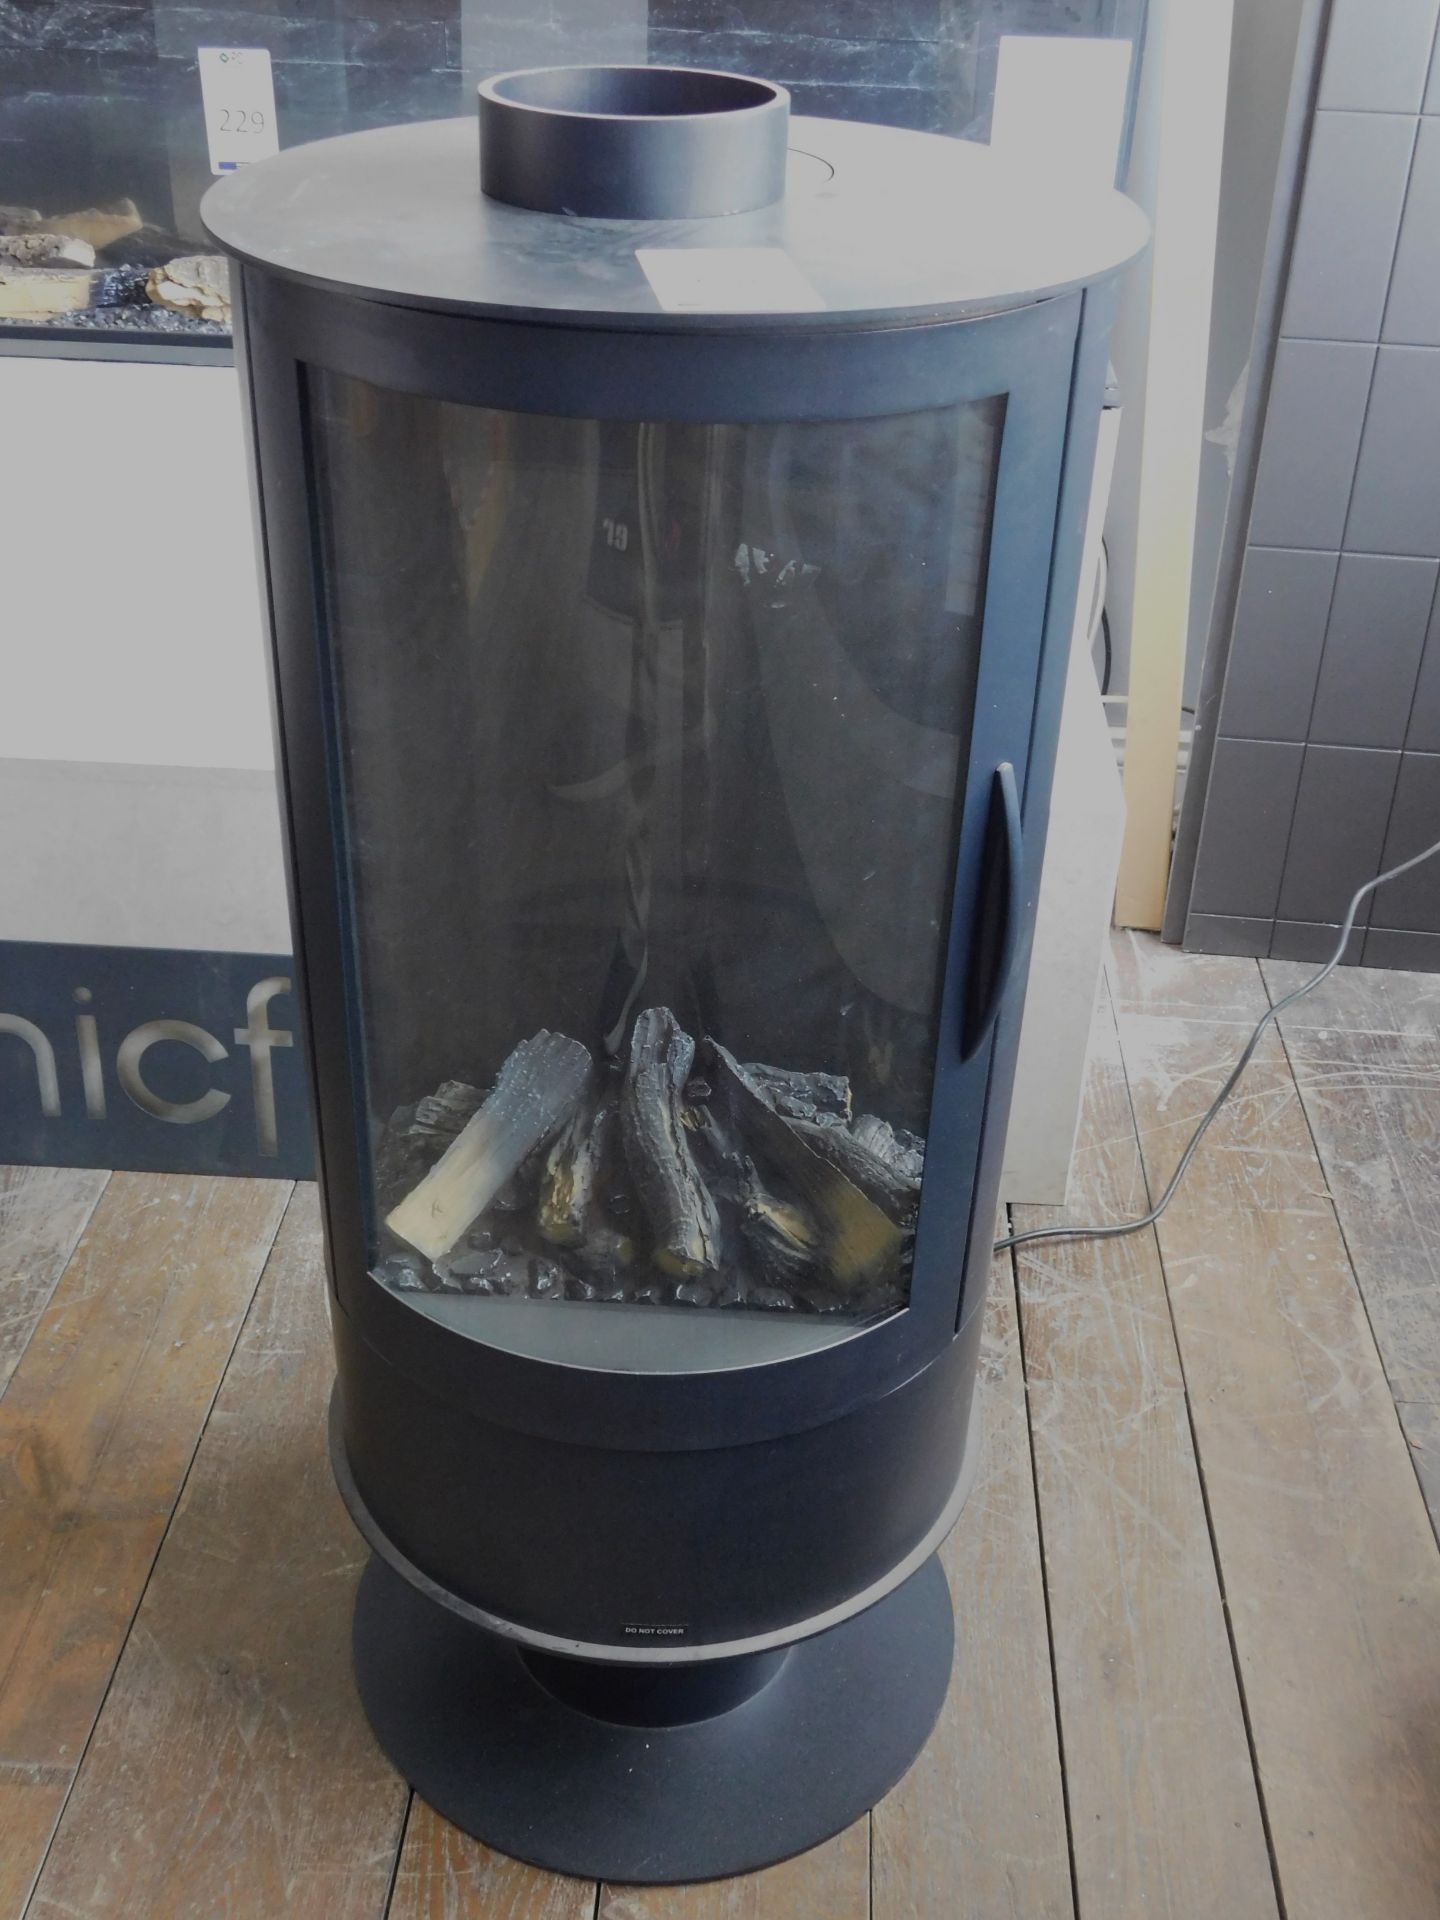 Ex-Display Cast Metal Cylindrical Stove (Where the company’s description/price information is